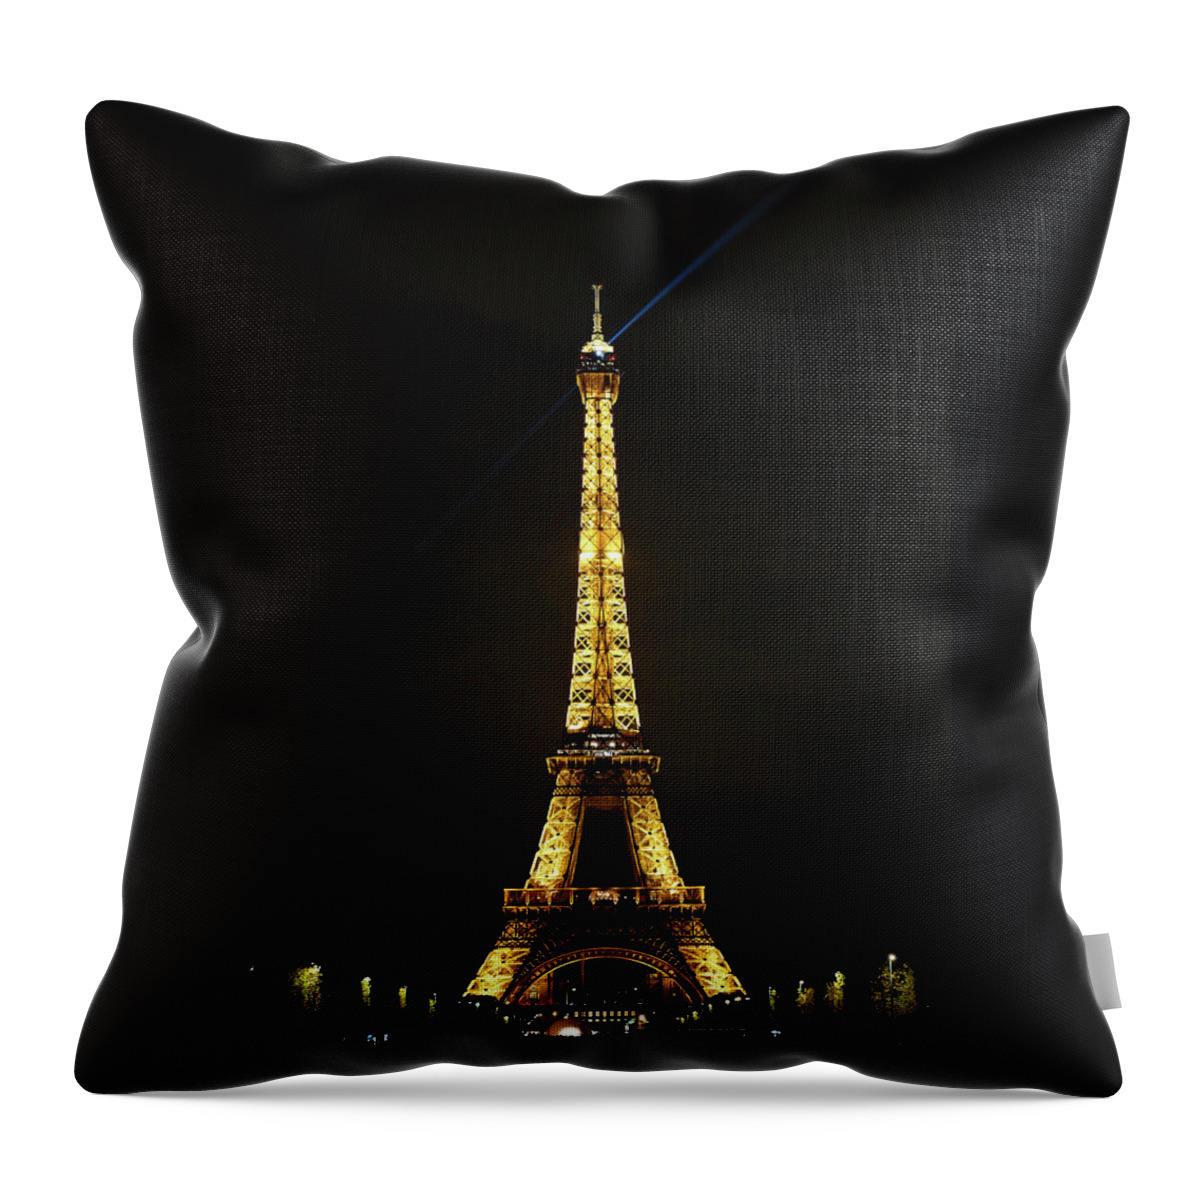 Eiffel Tower Throw Pillow featuring the photograph Just The Tower by Chris Casas